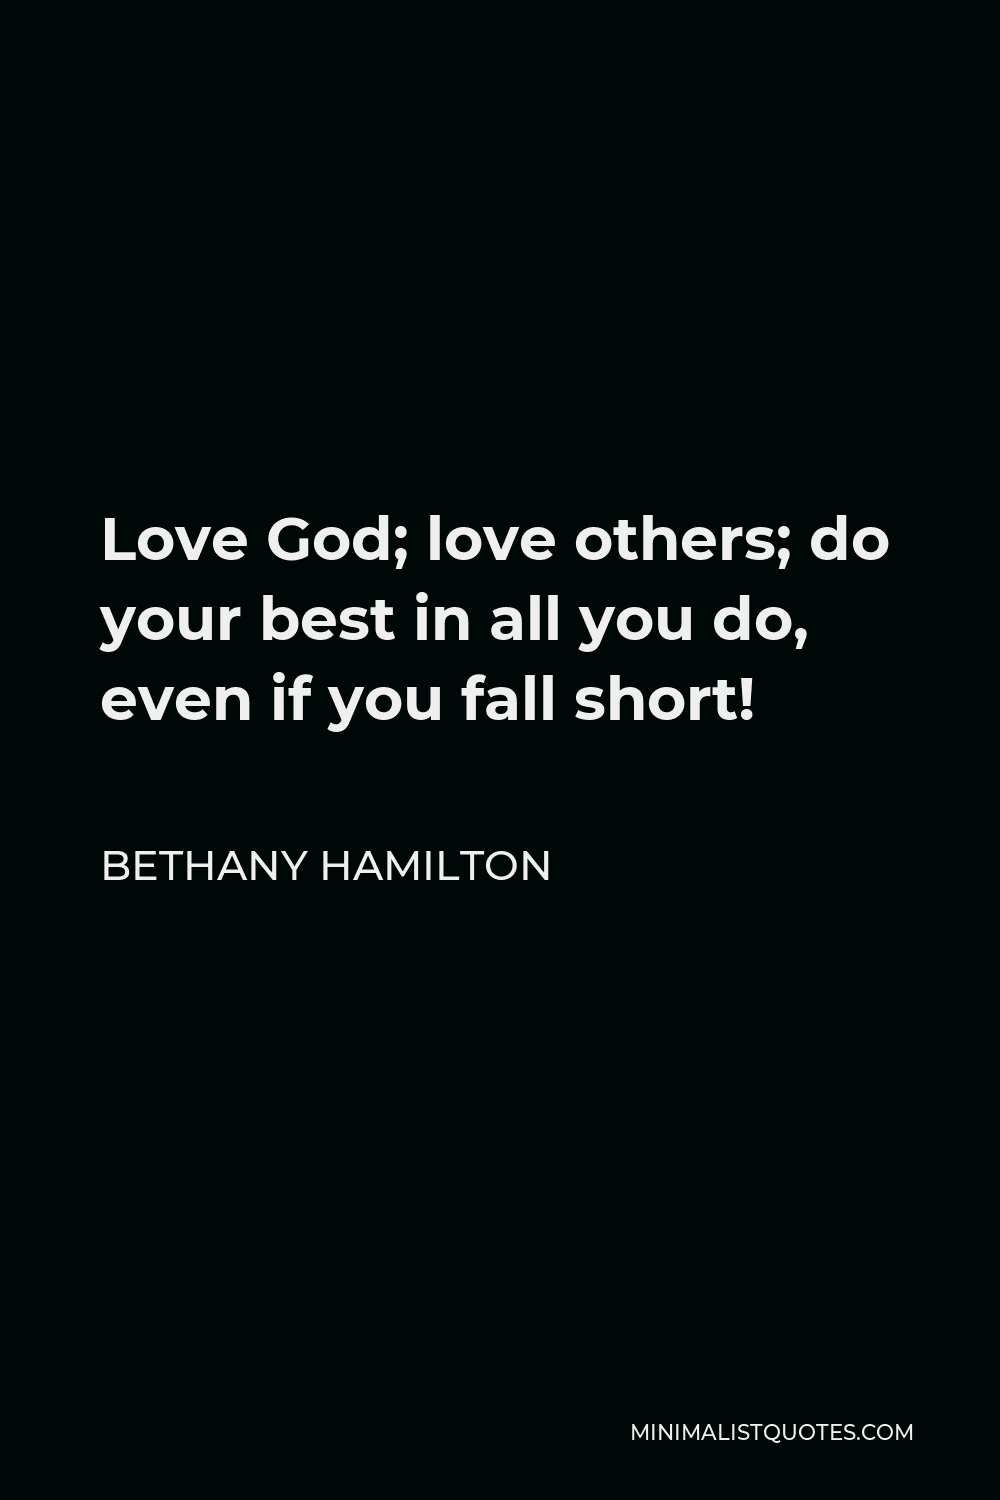 Bethany Hamilton Quote - Love God; love others; do your best in all you do, even if you fall short!